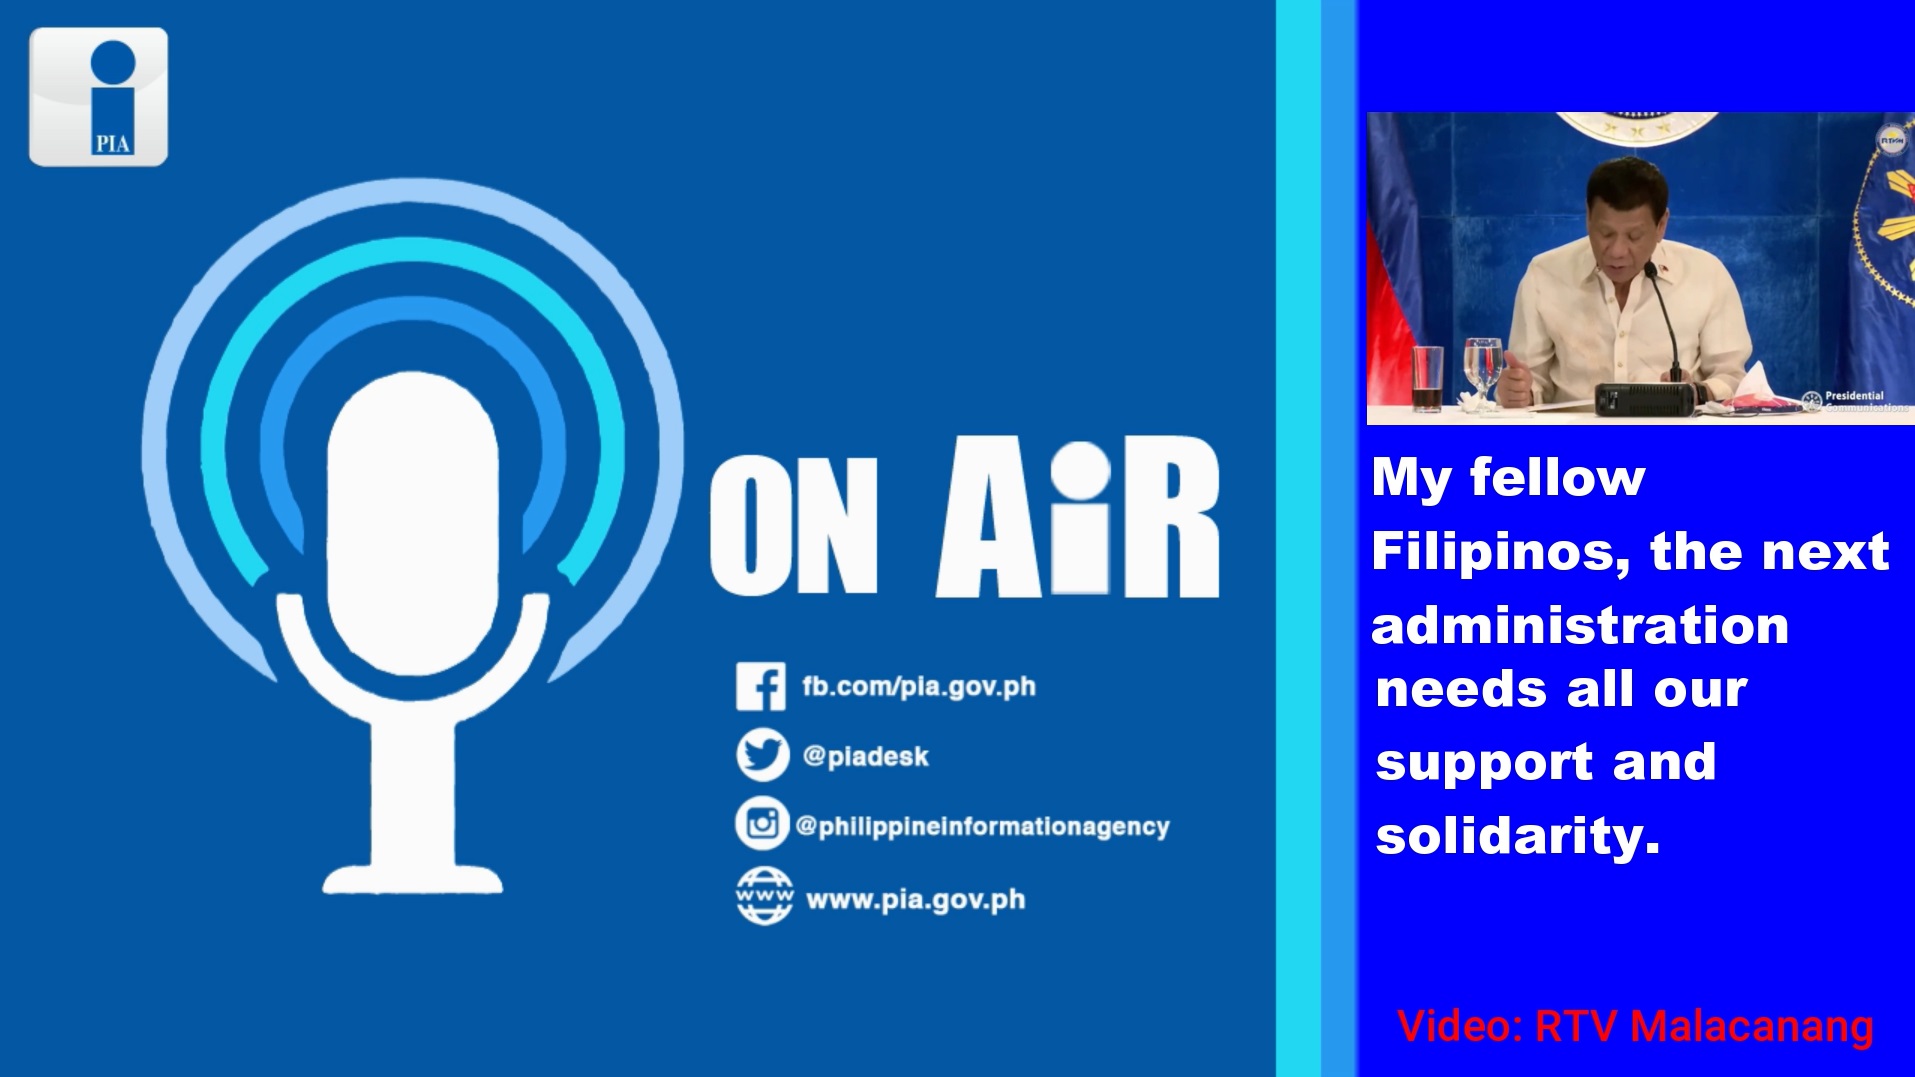 PIA ON AIR | Support the Newly Elected Leaders of the Country